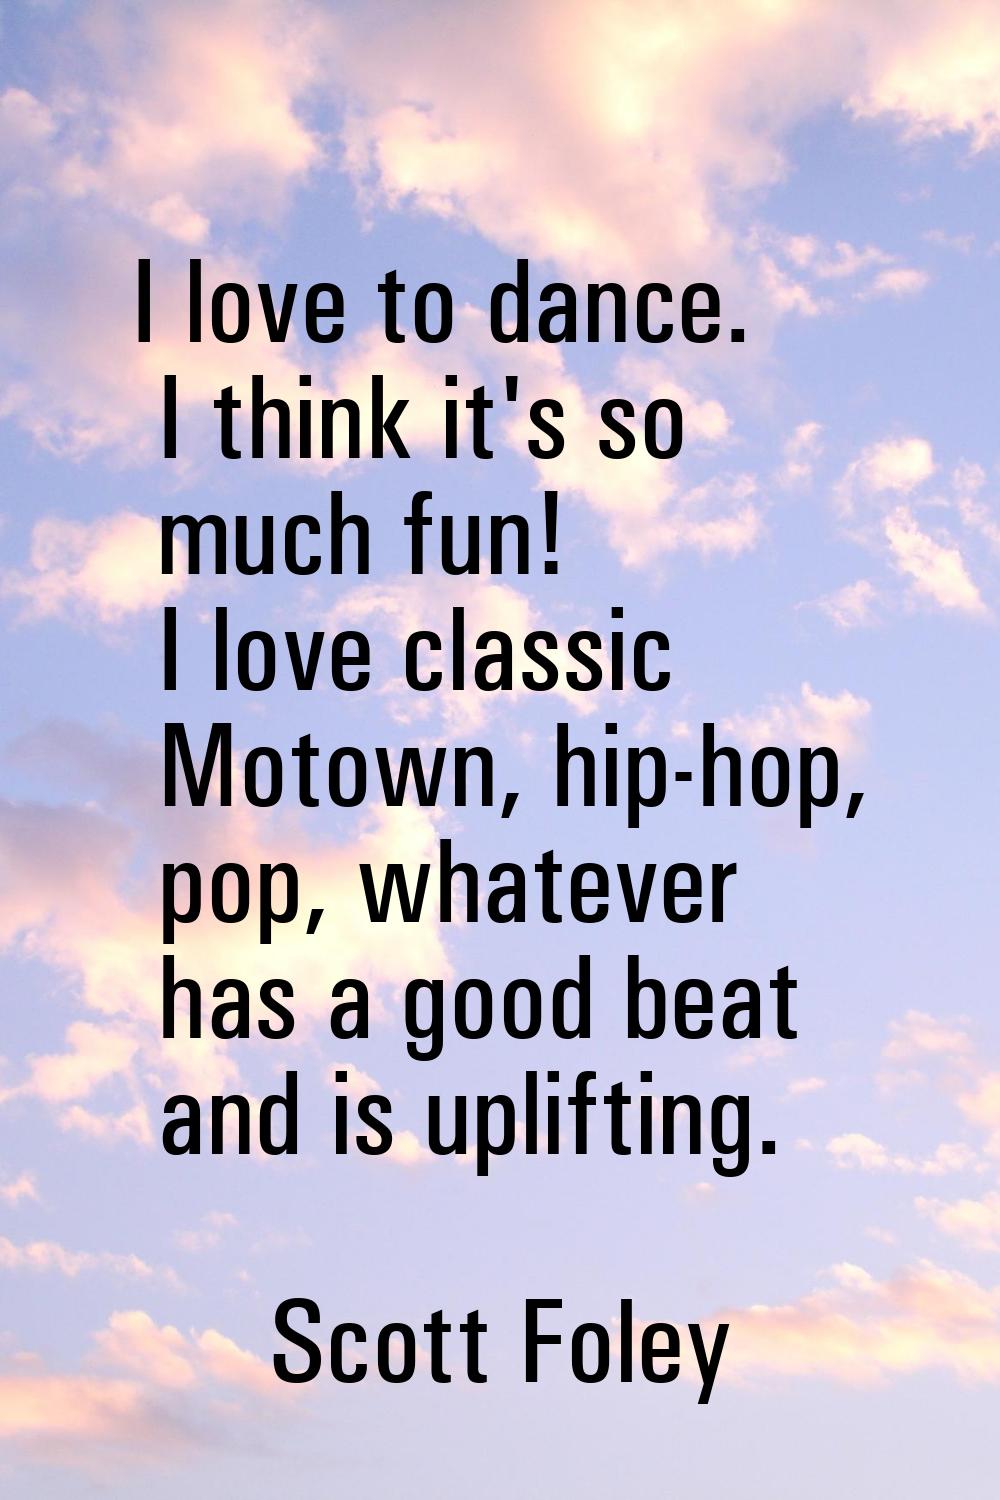 I love to dance. I think it's so much fun! I love classic Motown, hip-hop, pop, whatever has a good